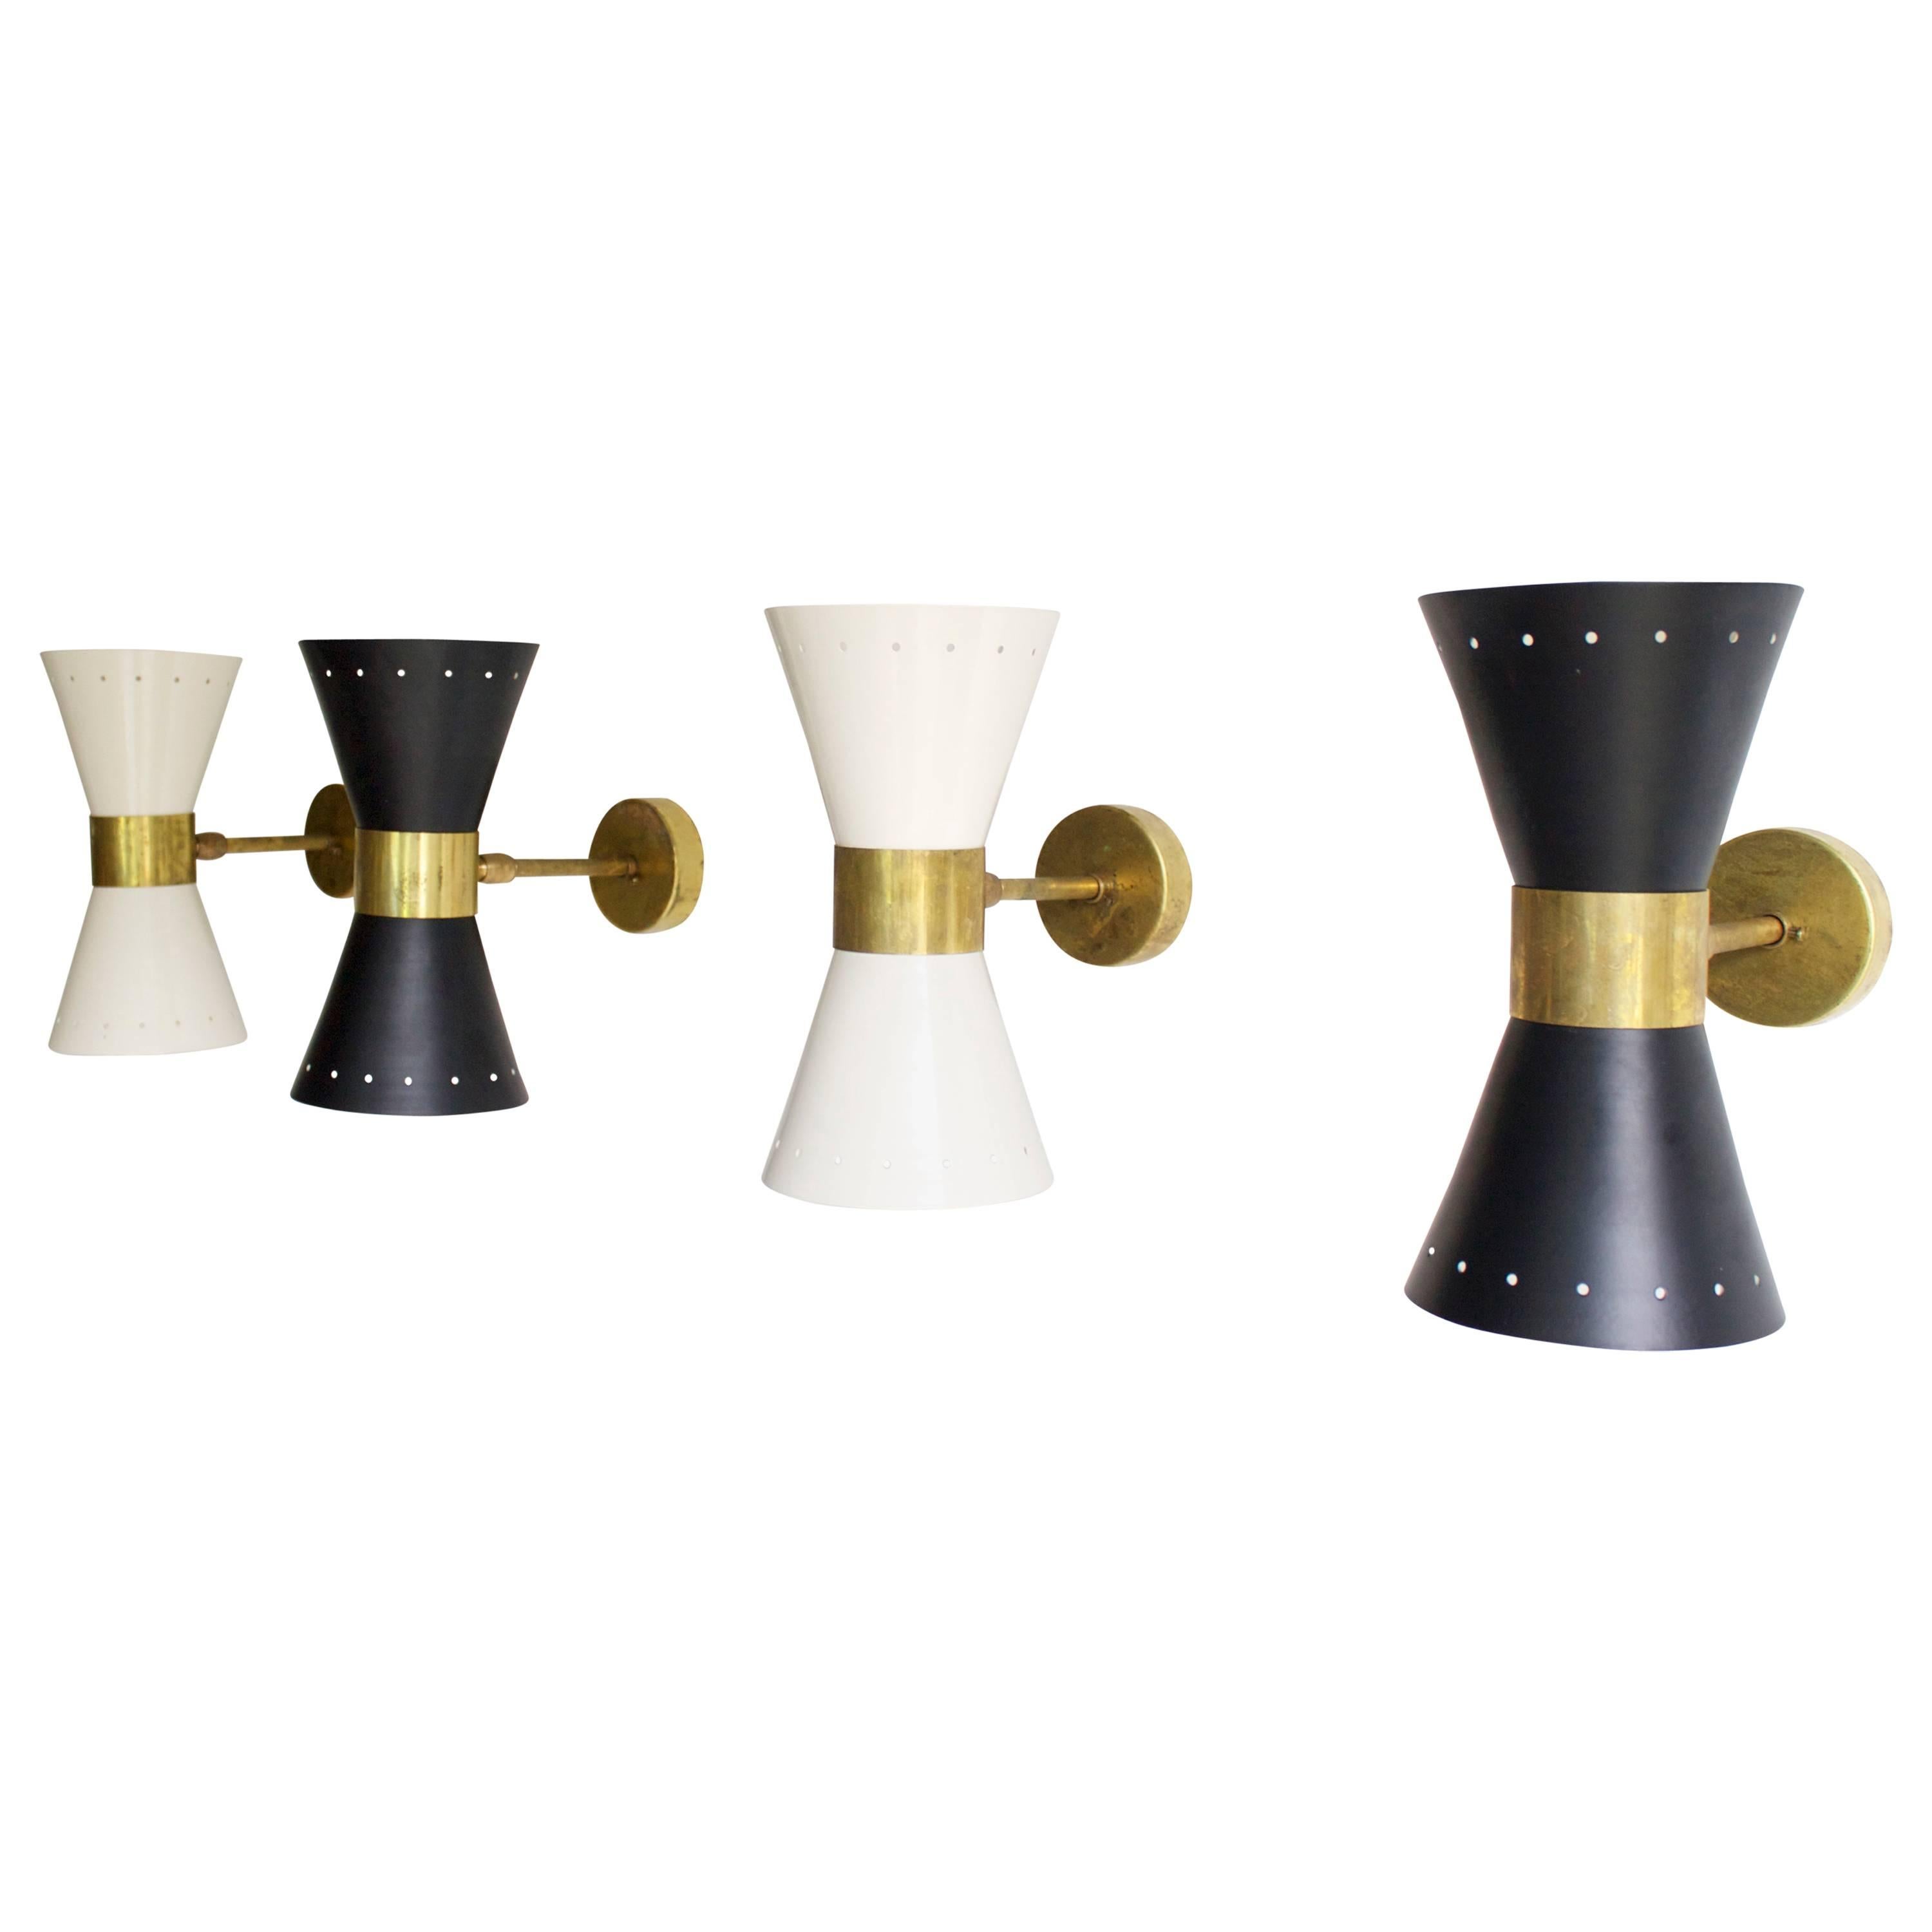 Four Diabolo Shaped Sconces in the Style of Stilnovo